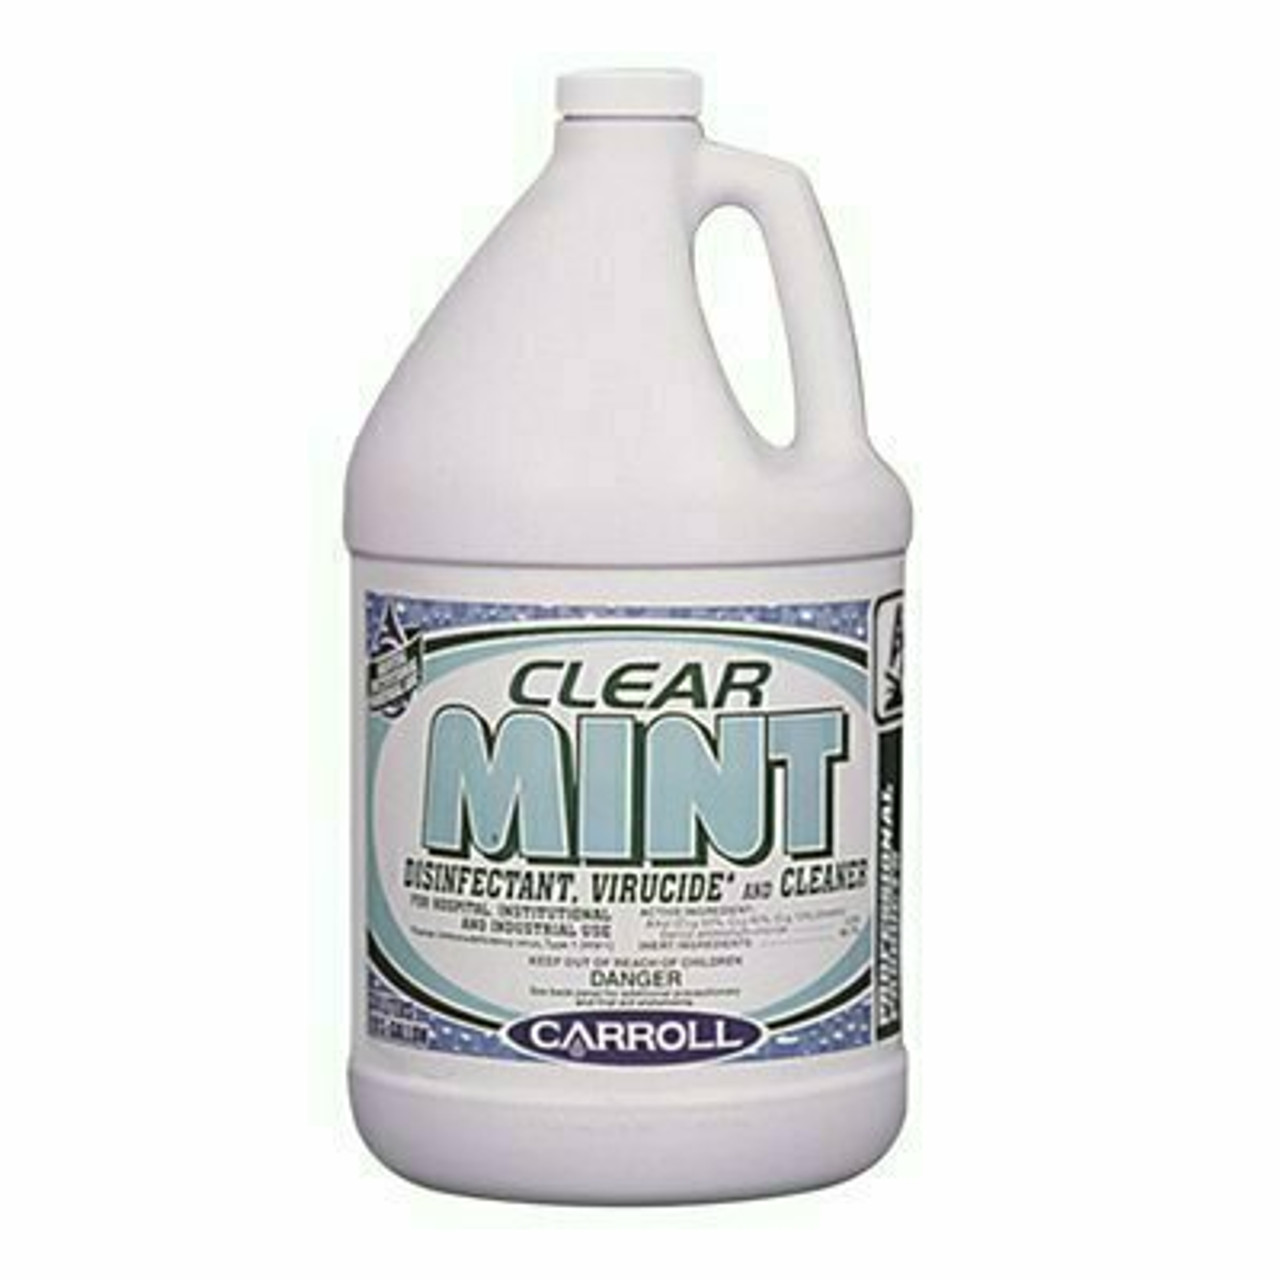 Carroll Company Institutional Mint O Disinfectant/Deodorant, Gallon